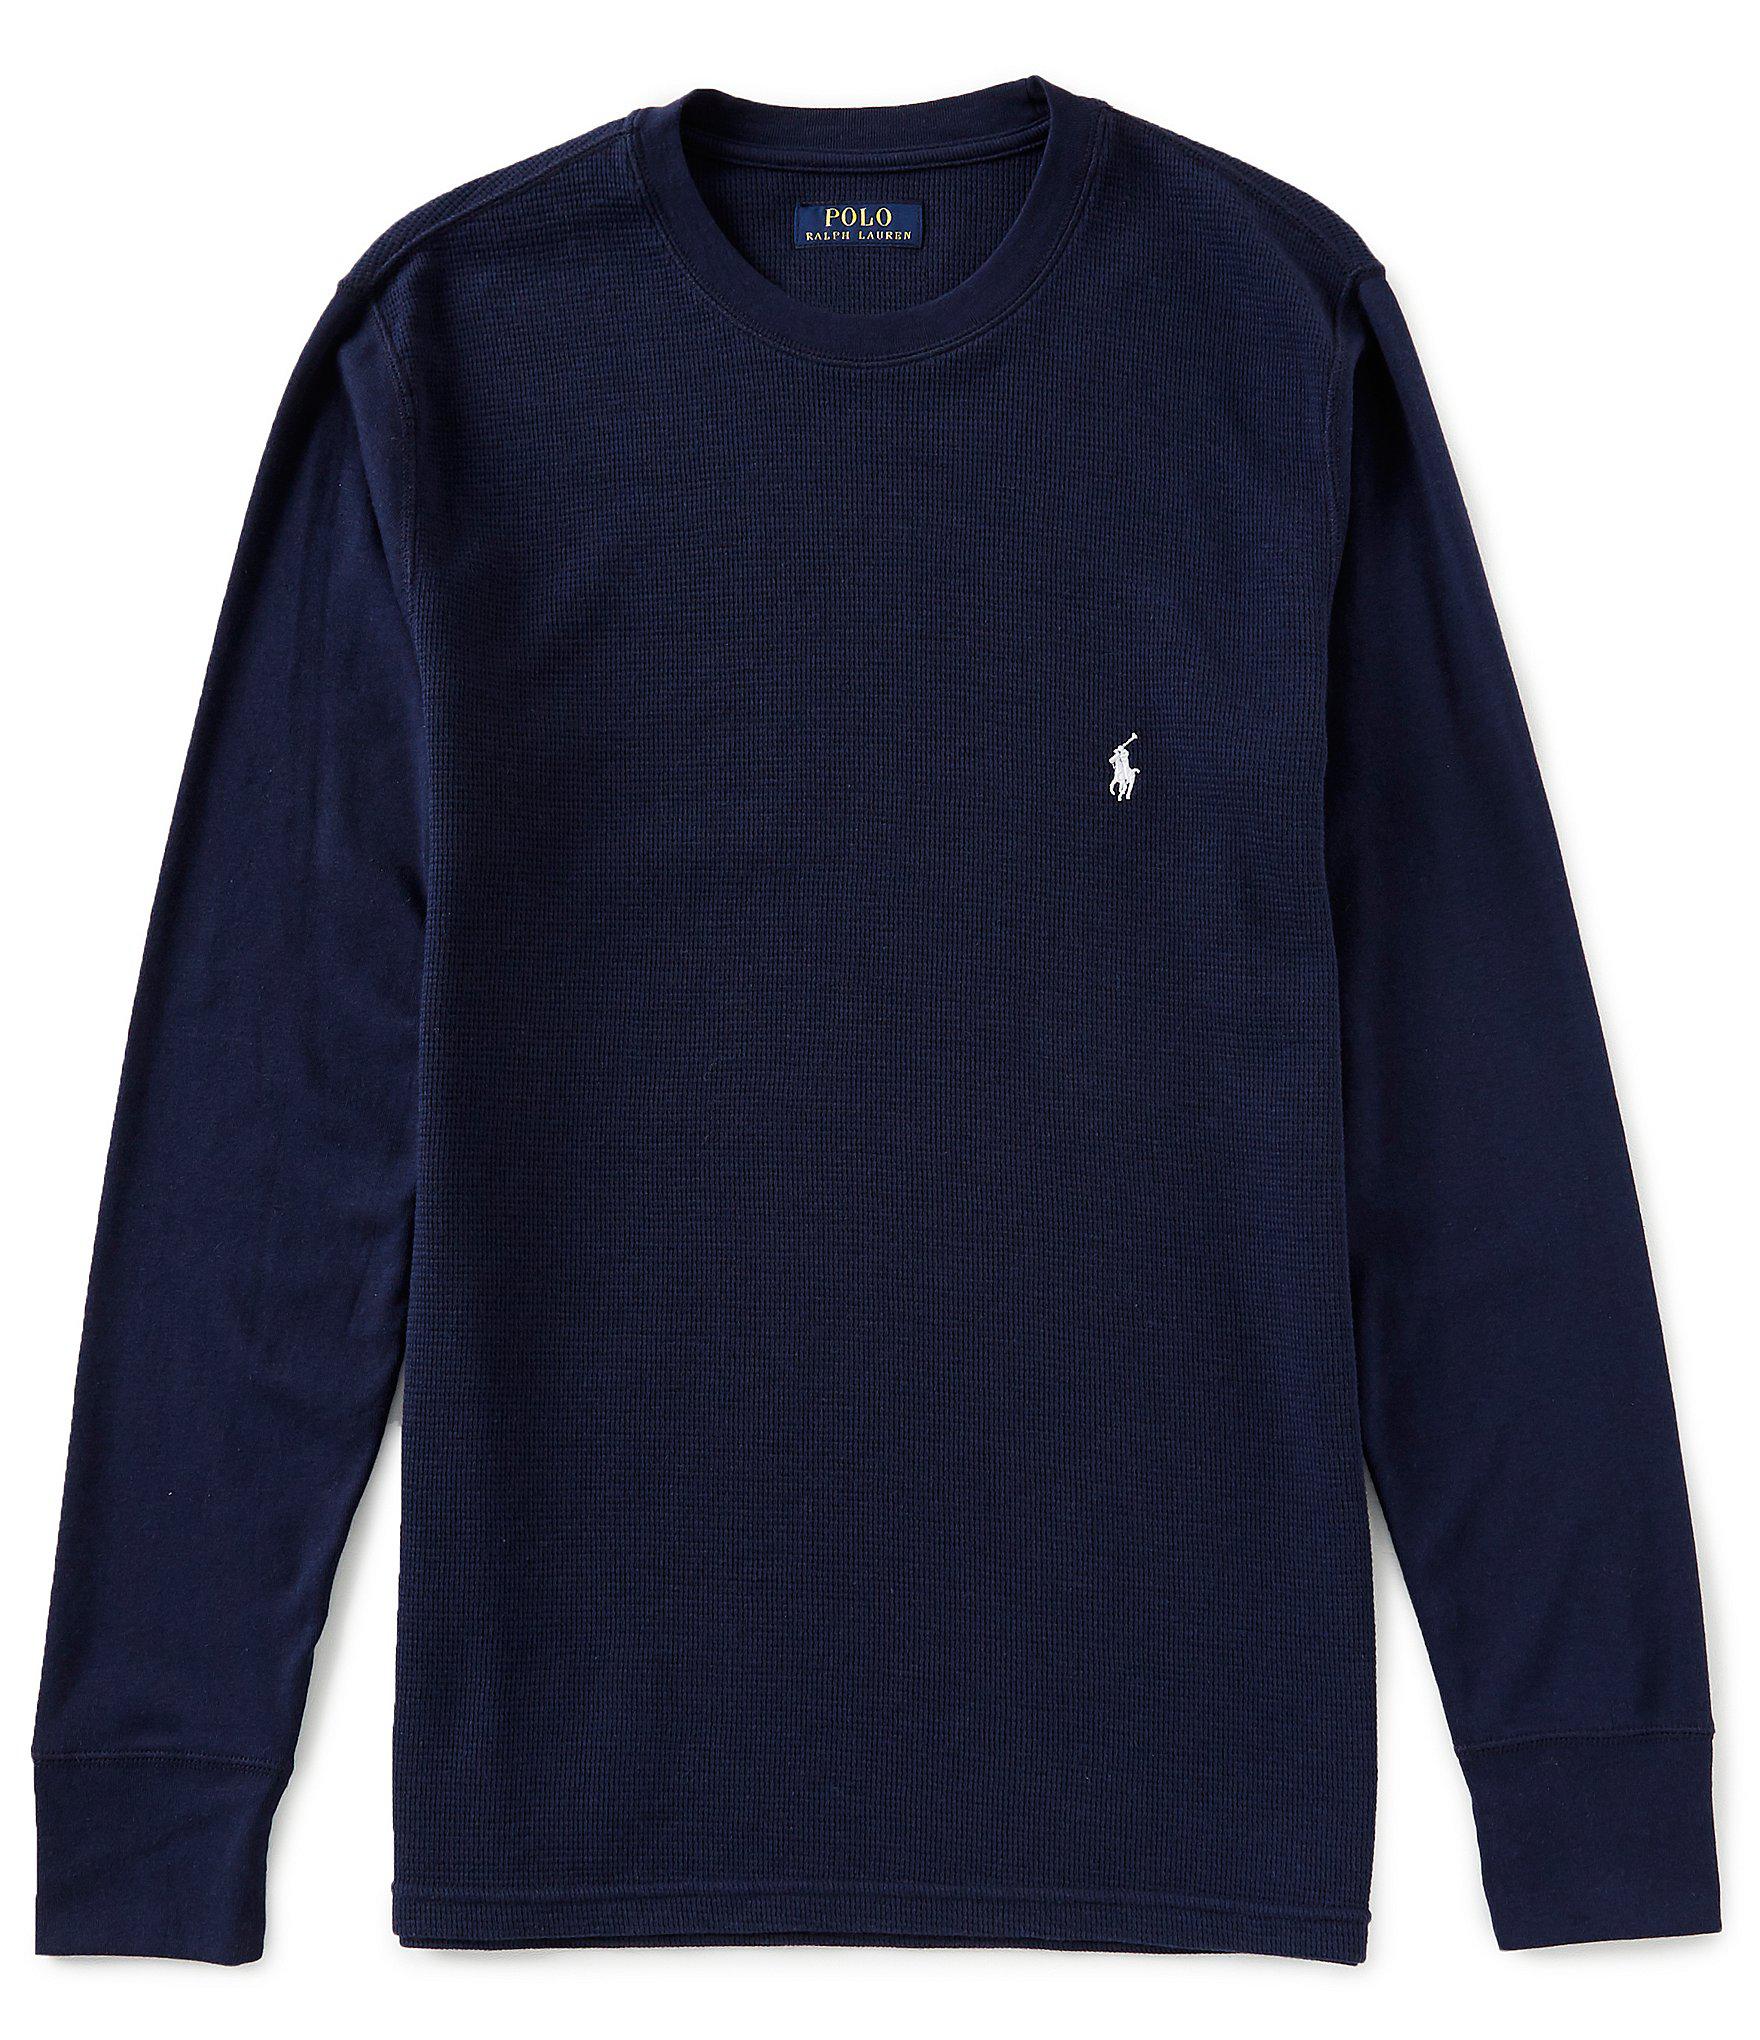 Polo Ralph Lauren Cotton Waffle-knit Crewneck in Navy (Blue) for Men - Lyst